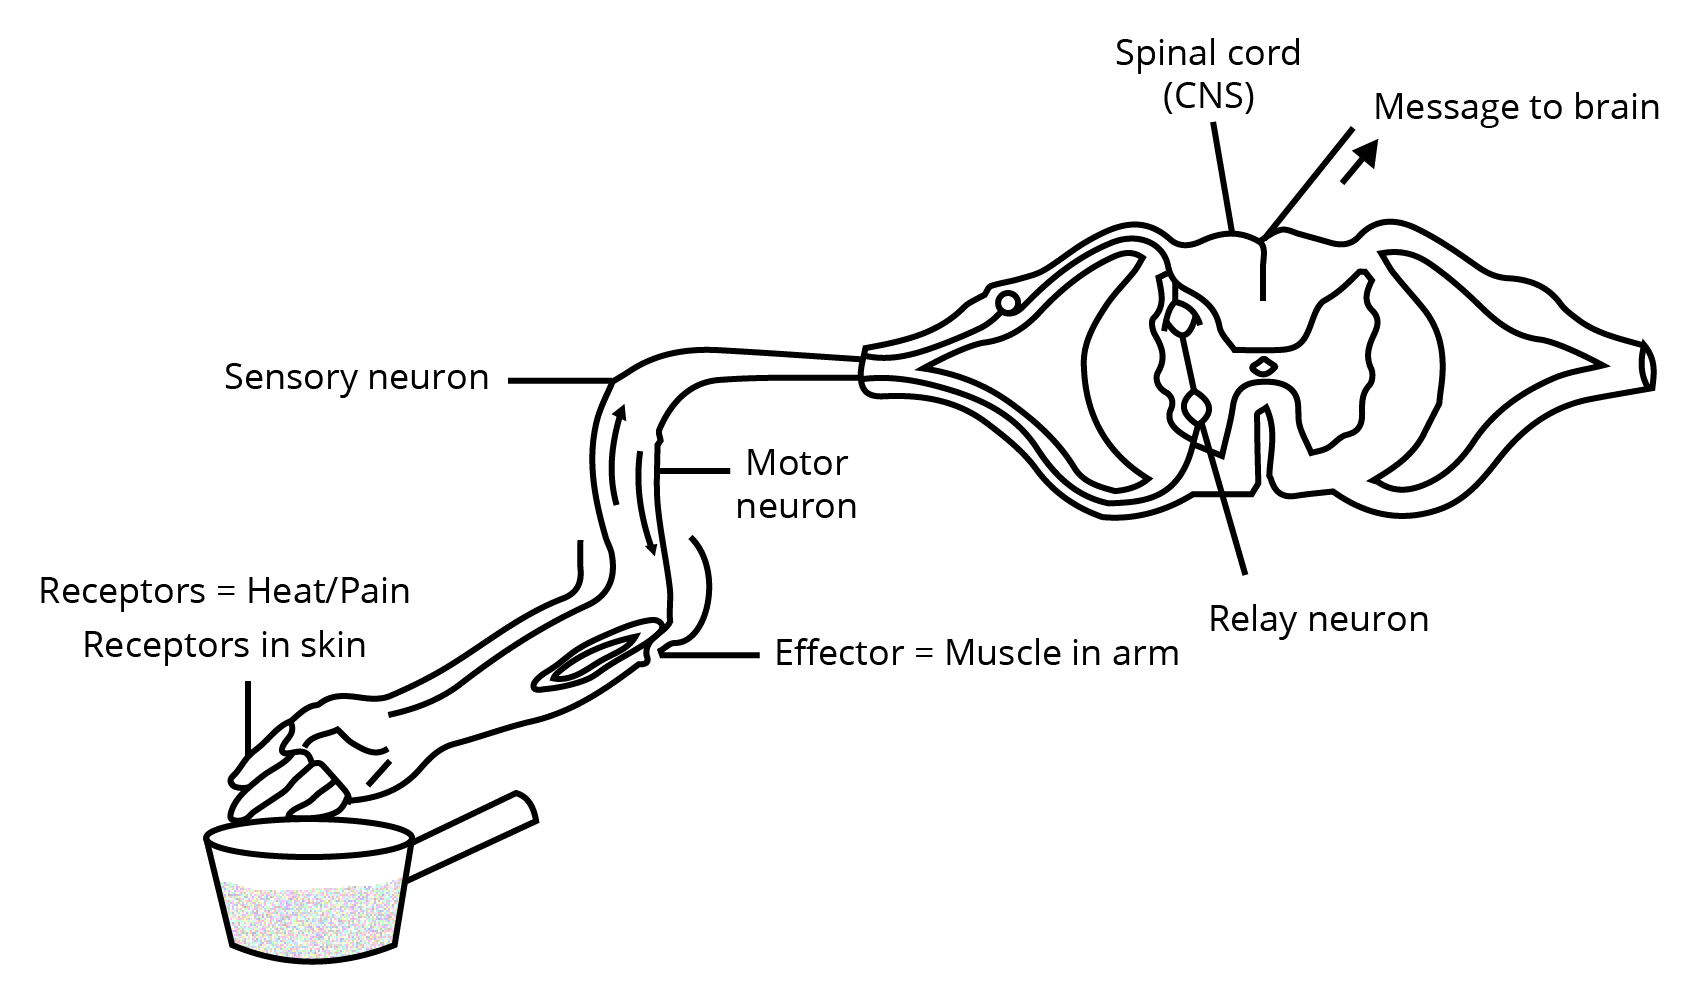 Diagram showing reflex pathway on touching a hot object